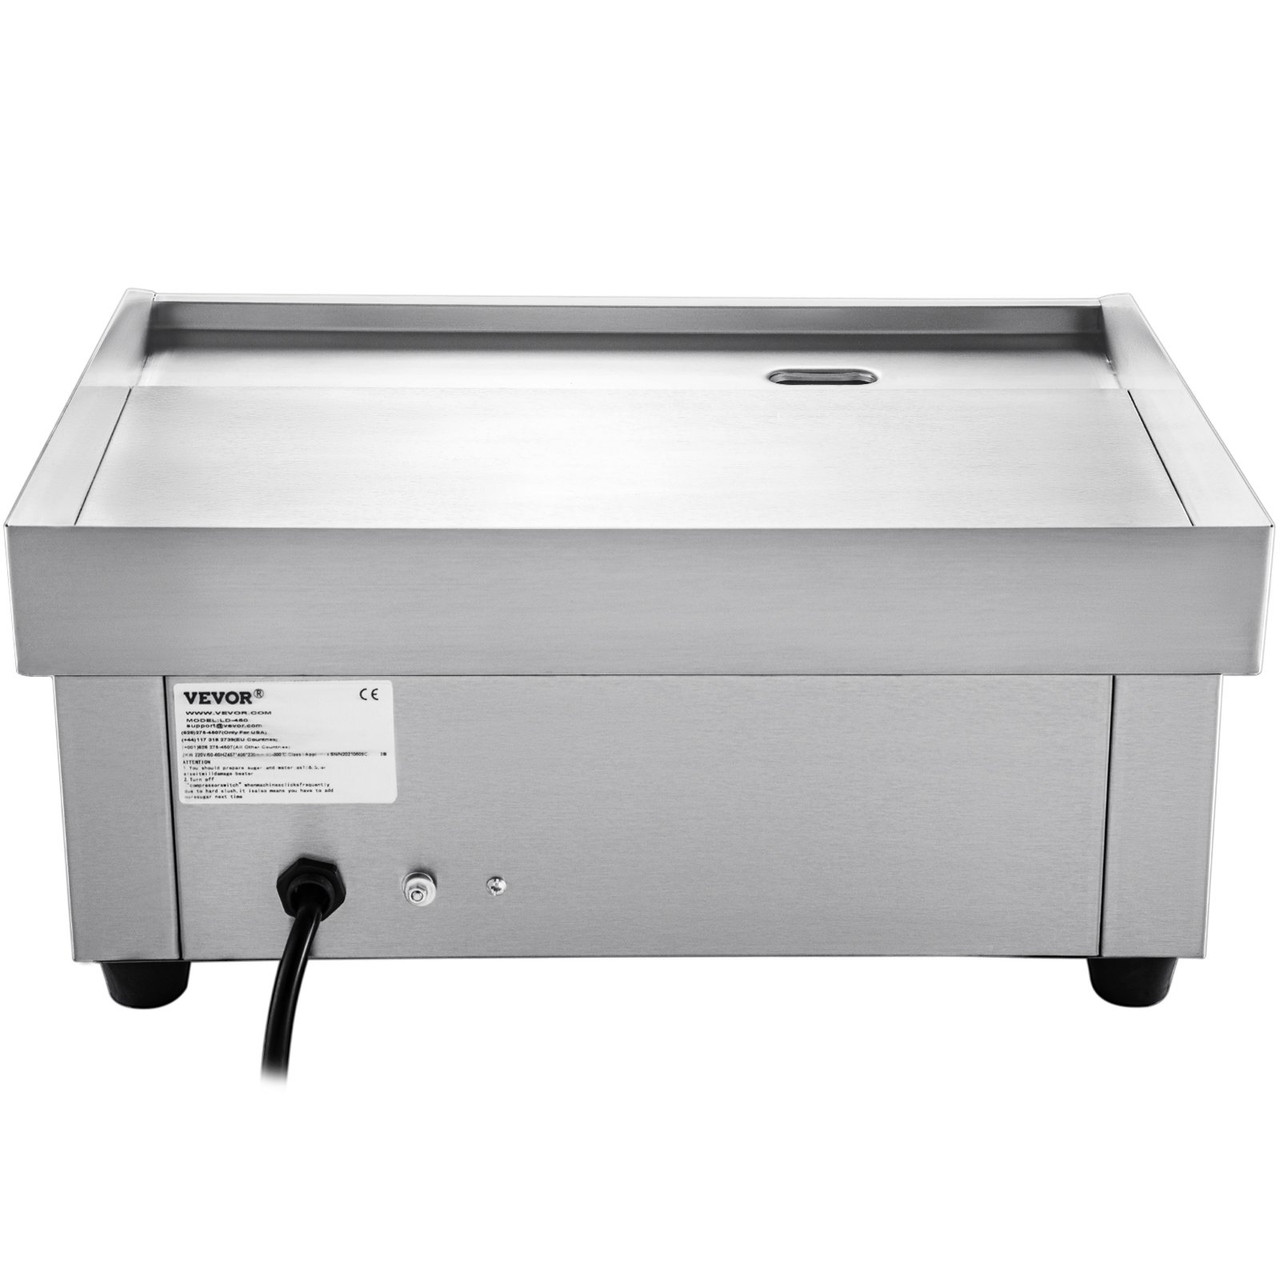 VEVOR 22" Commercial Electric Griddle,Electric Countertop Flat Top Griddle 110V 1600W,Non-Stick Restaurant Teppanyaki Stainless Steel Grill ,Adjustable Temperature Control 122°F-572°F.